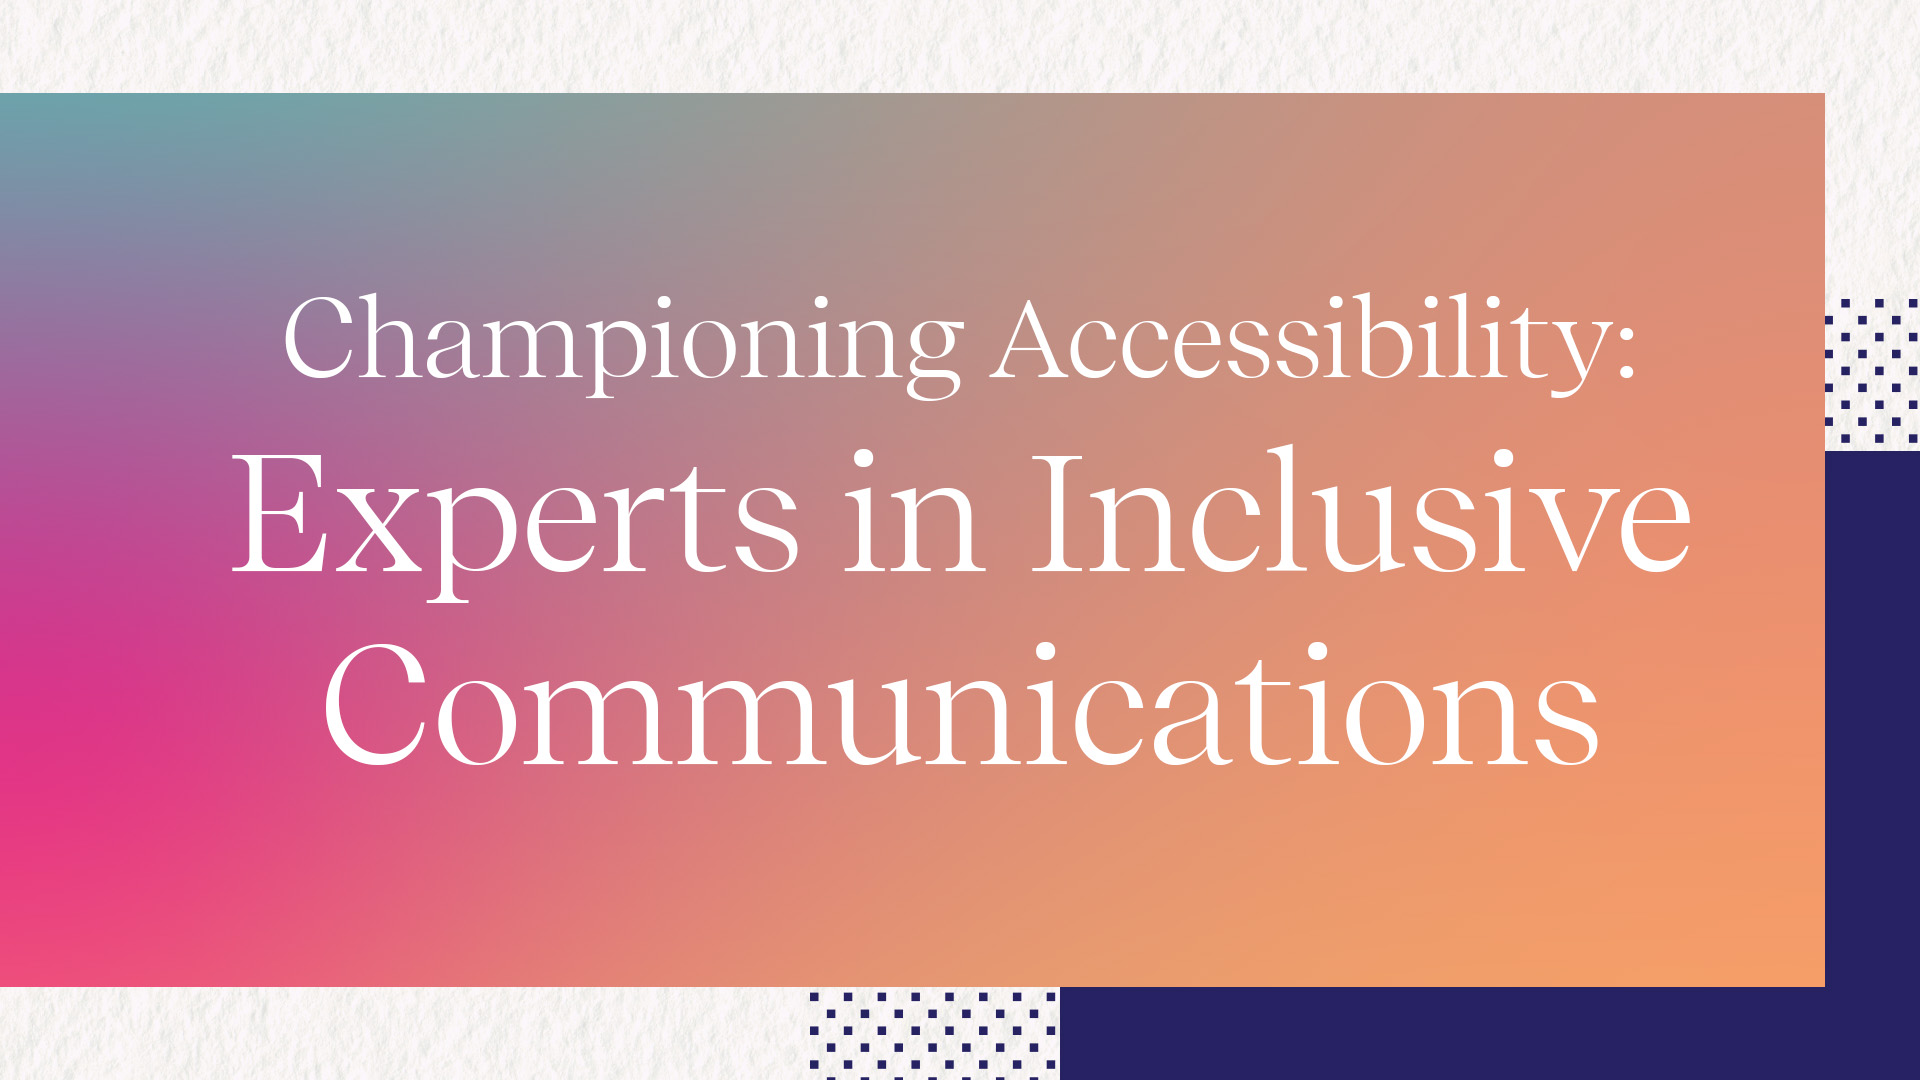 Championing Accessibility: Experts in Inclusive Communications